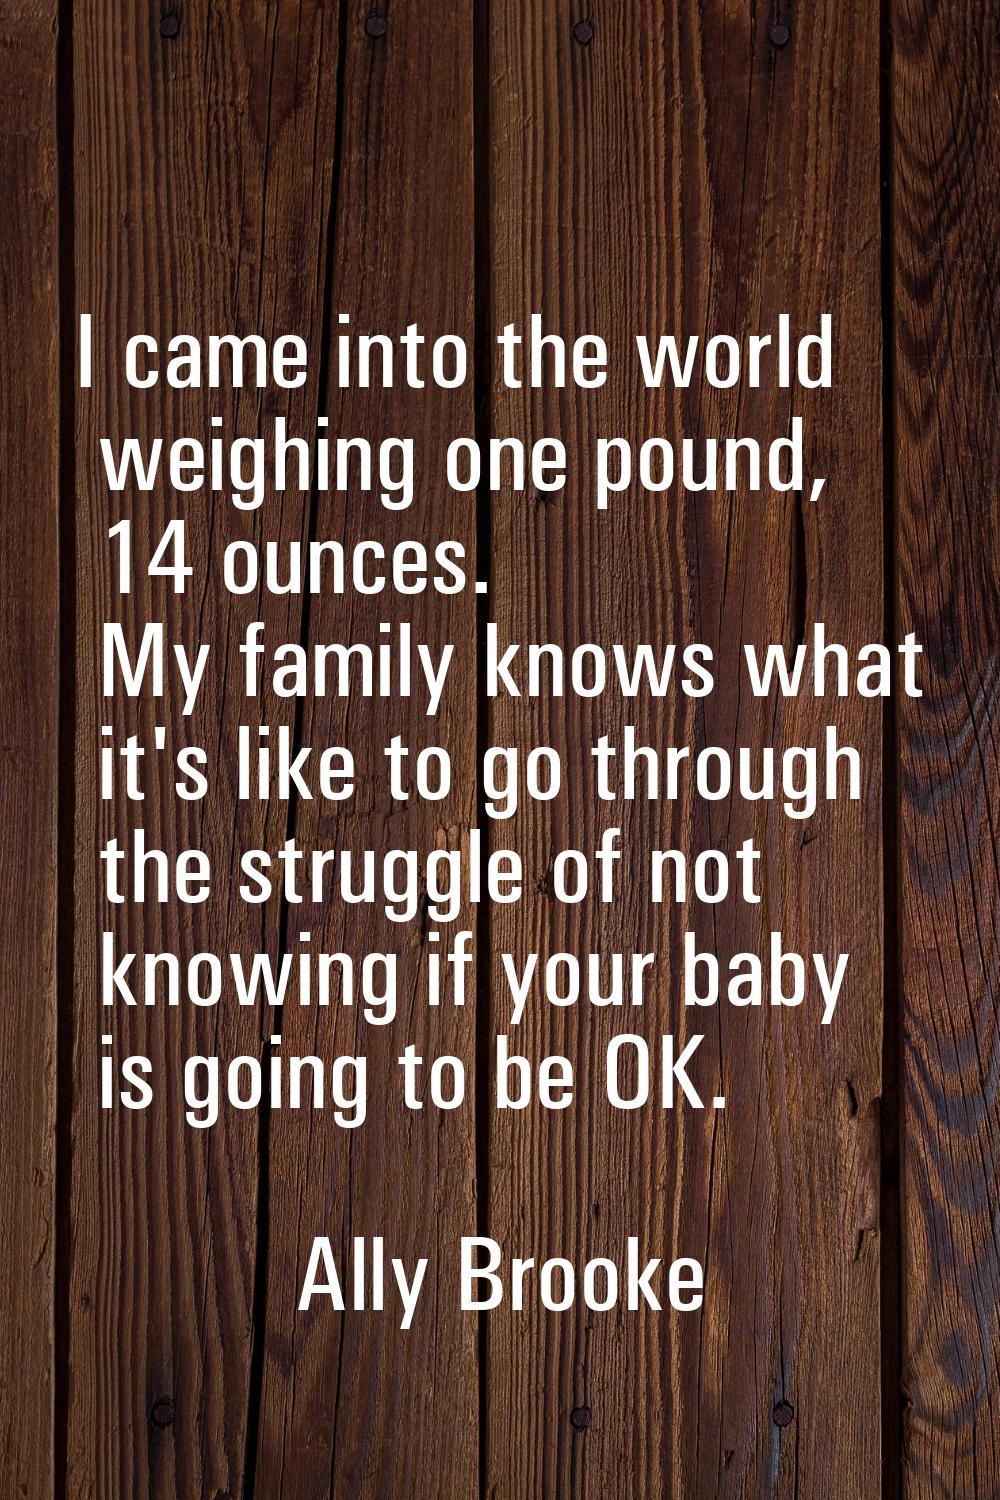 I came into the world weighing one pound, 14 ounces. My family knows what it's like to go through t